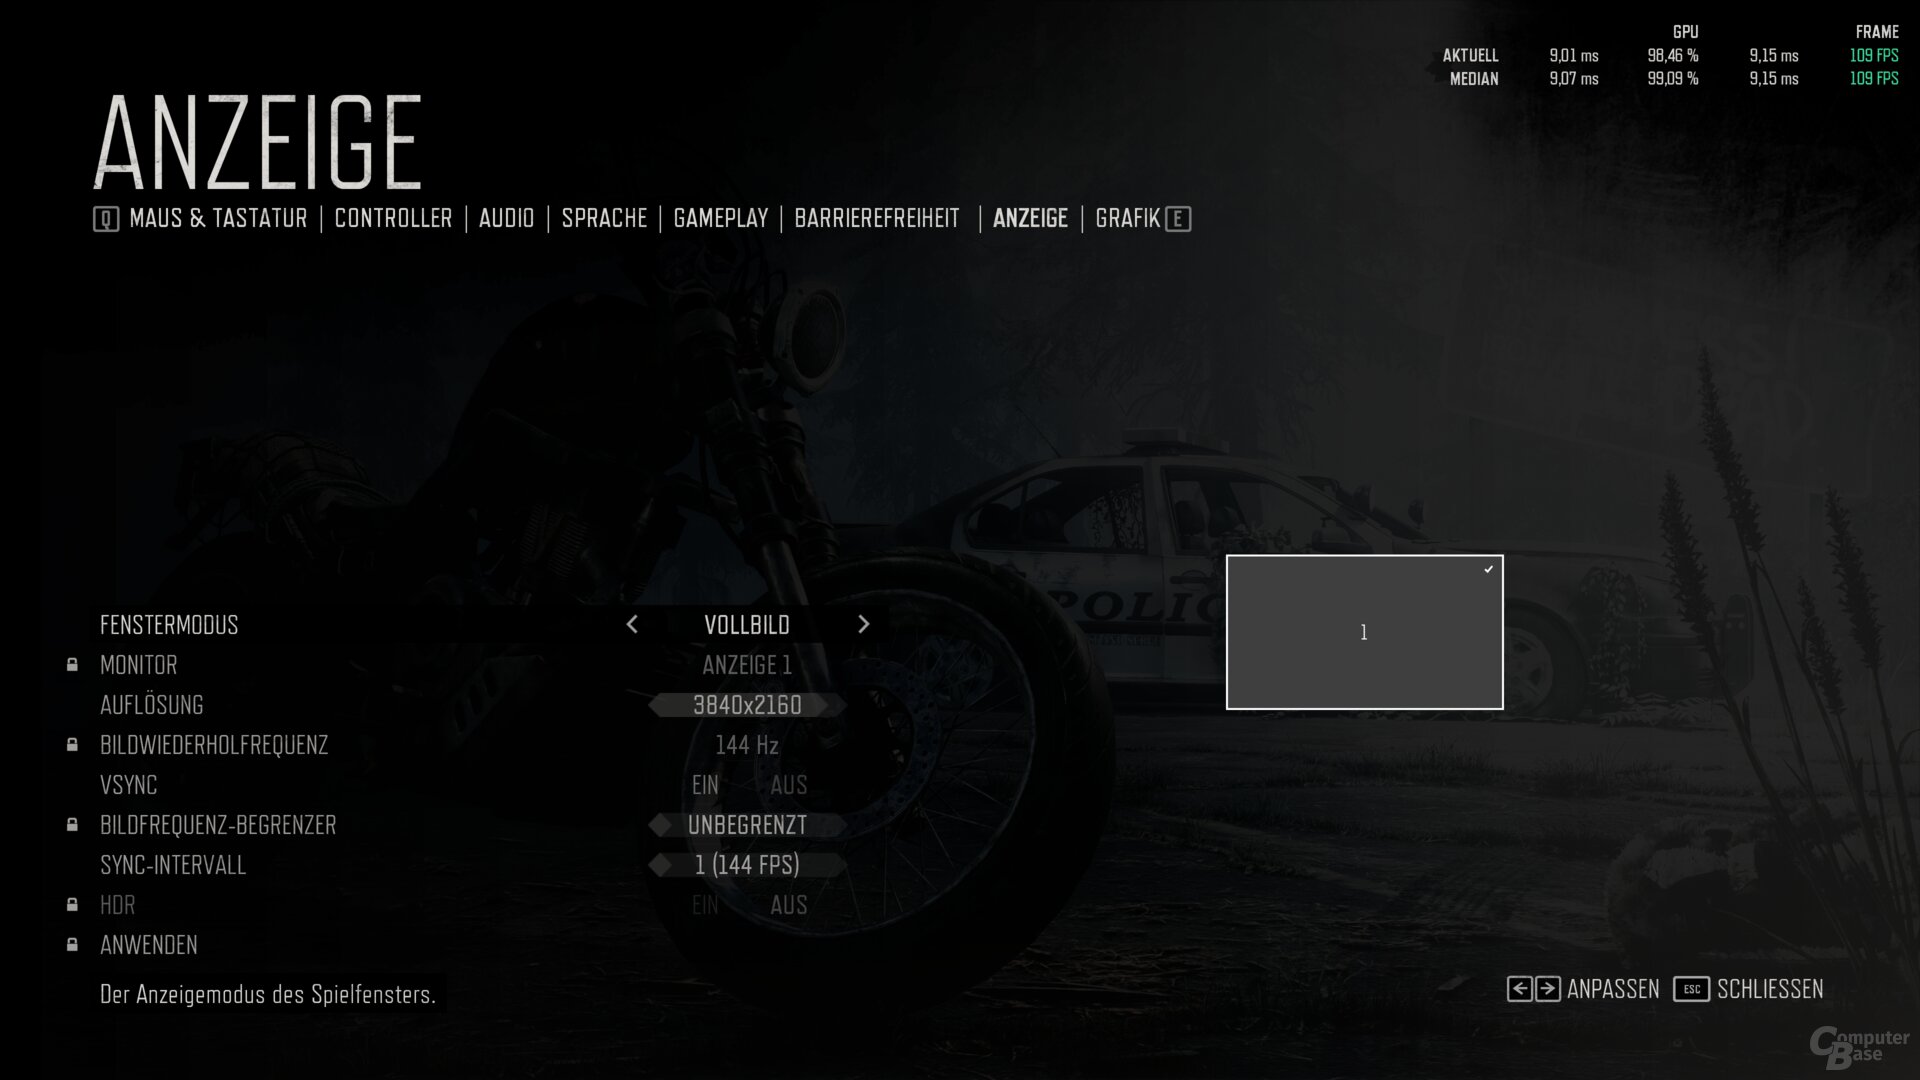 The Days Gone graphics menu